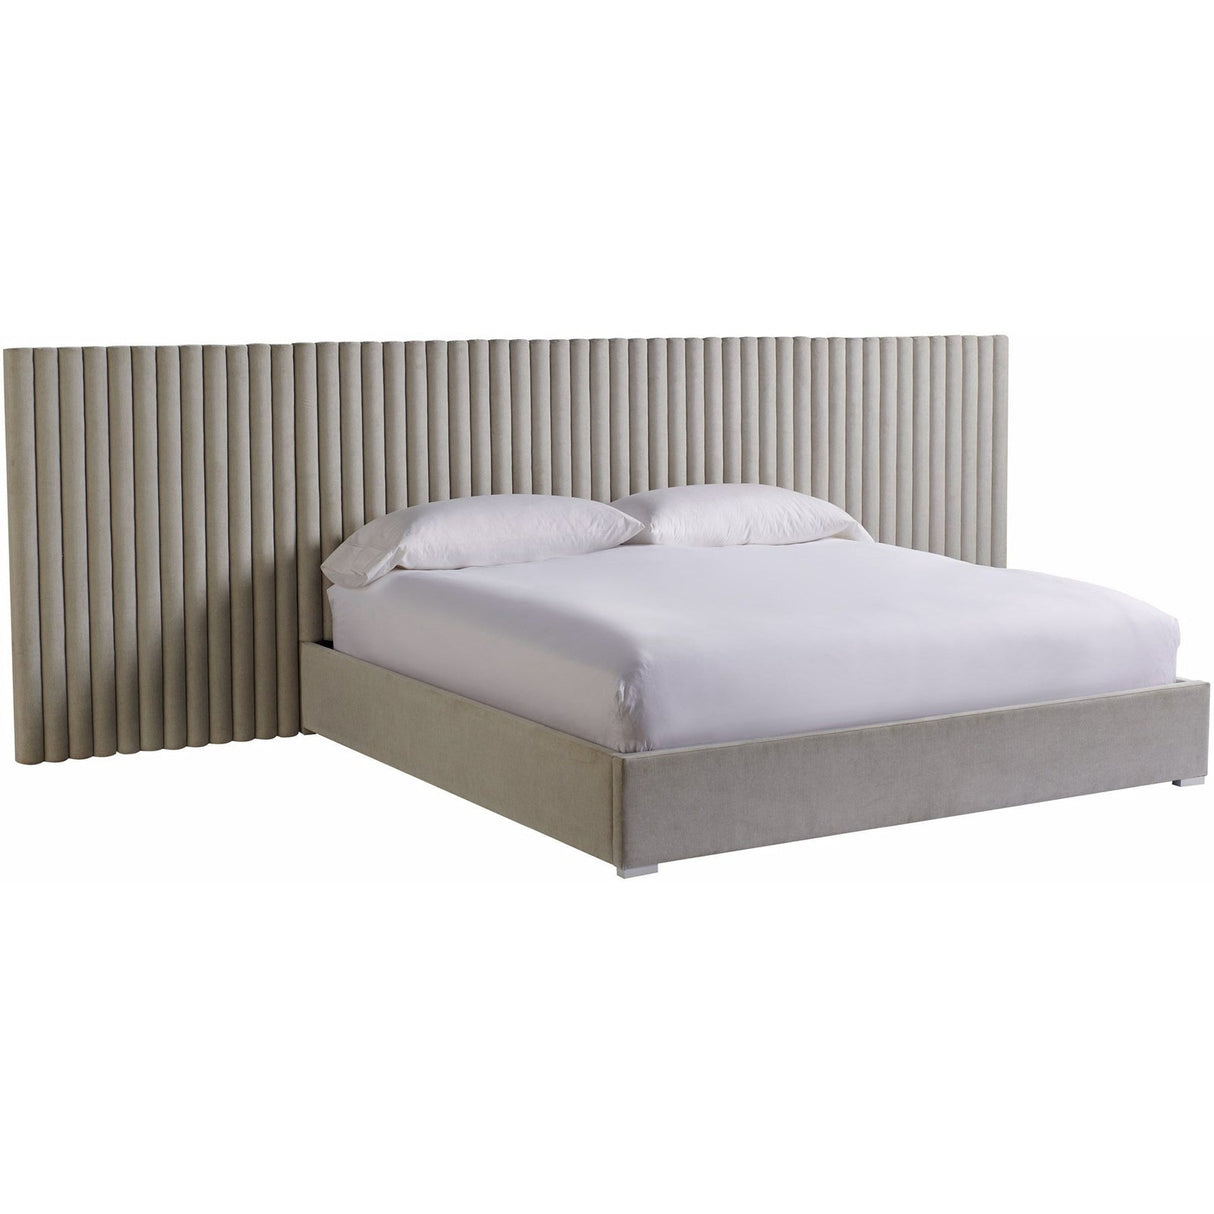 Universal Furniture Modern Decker Wall Bed With Panels